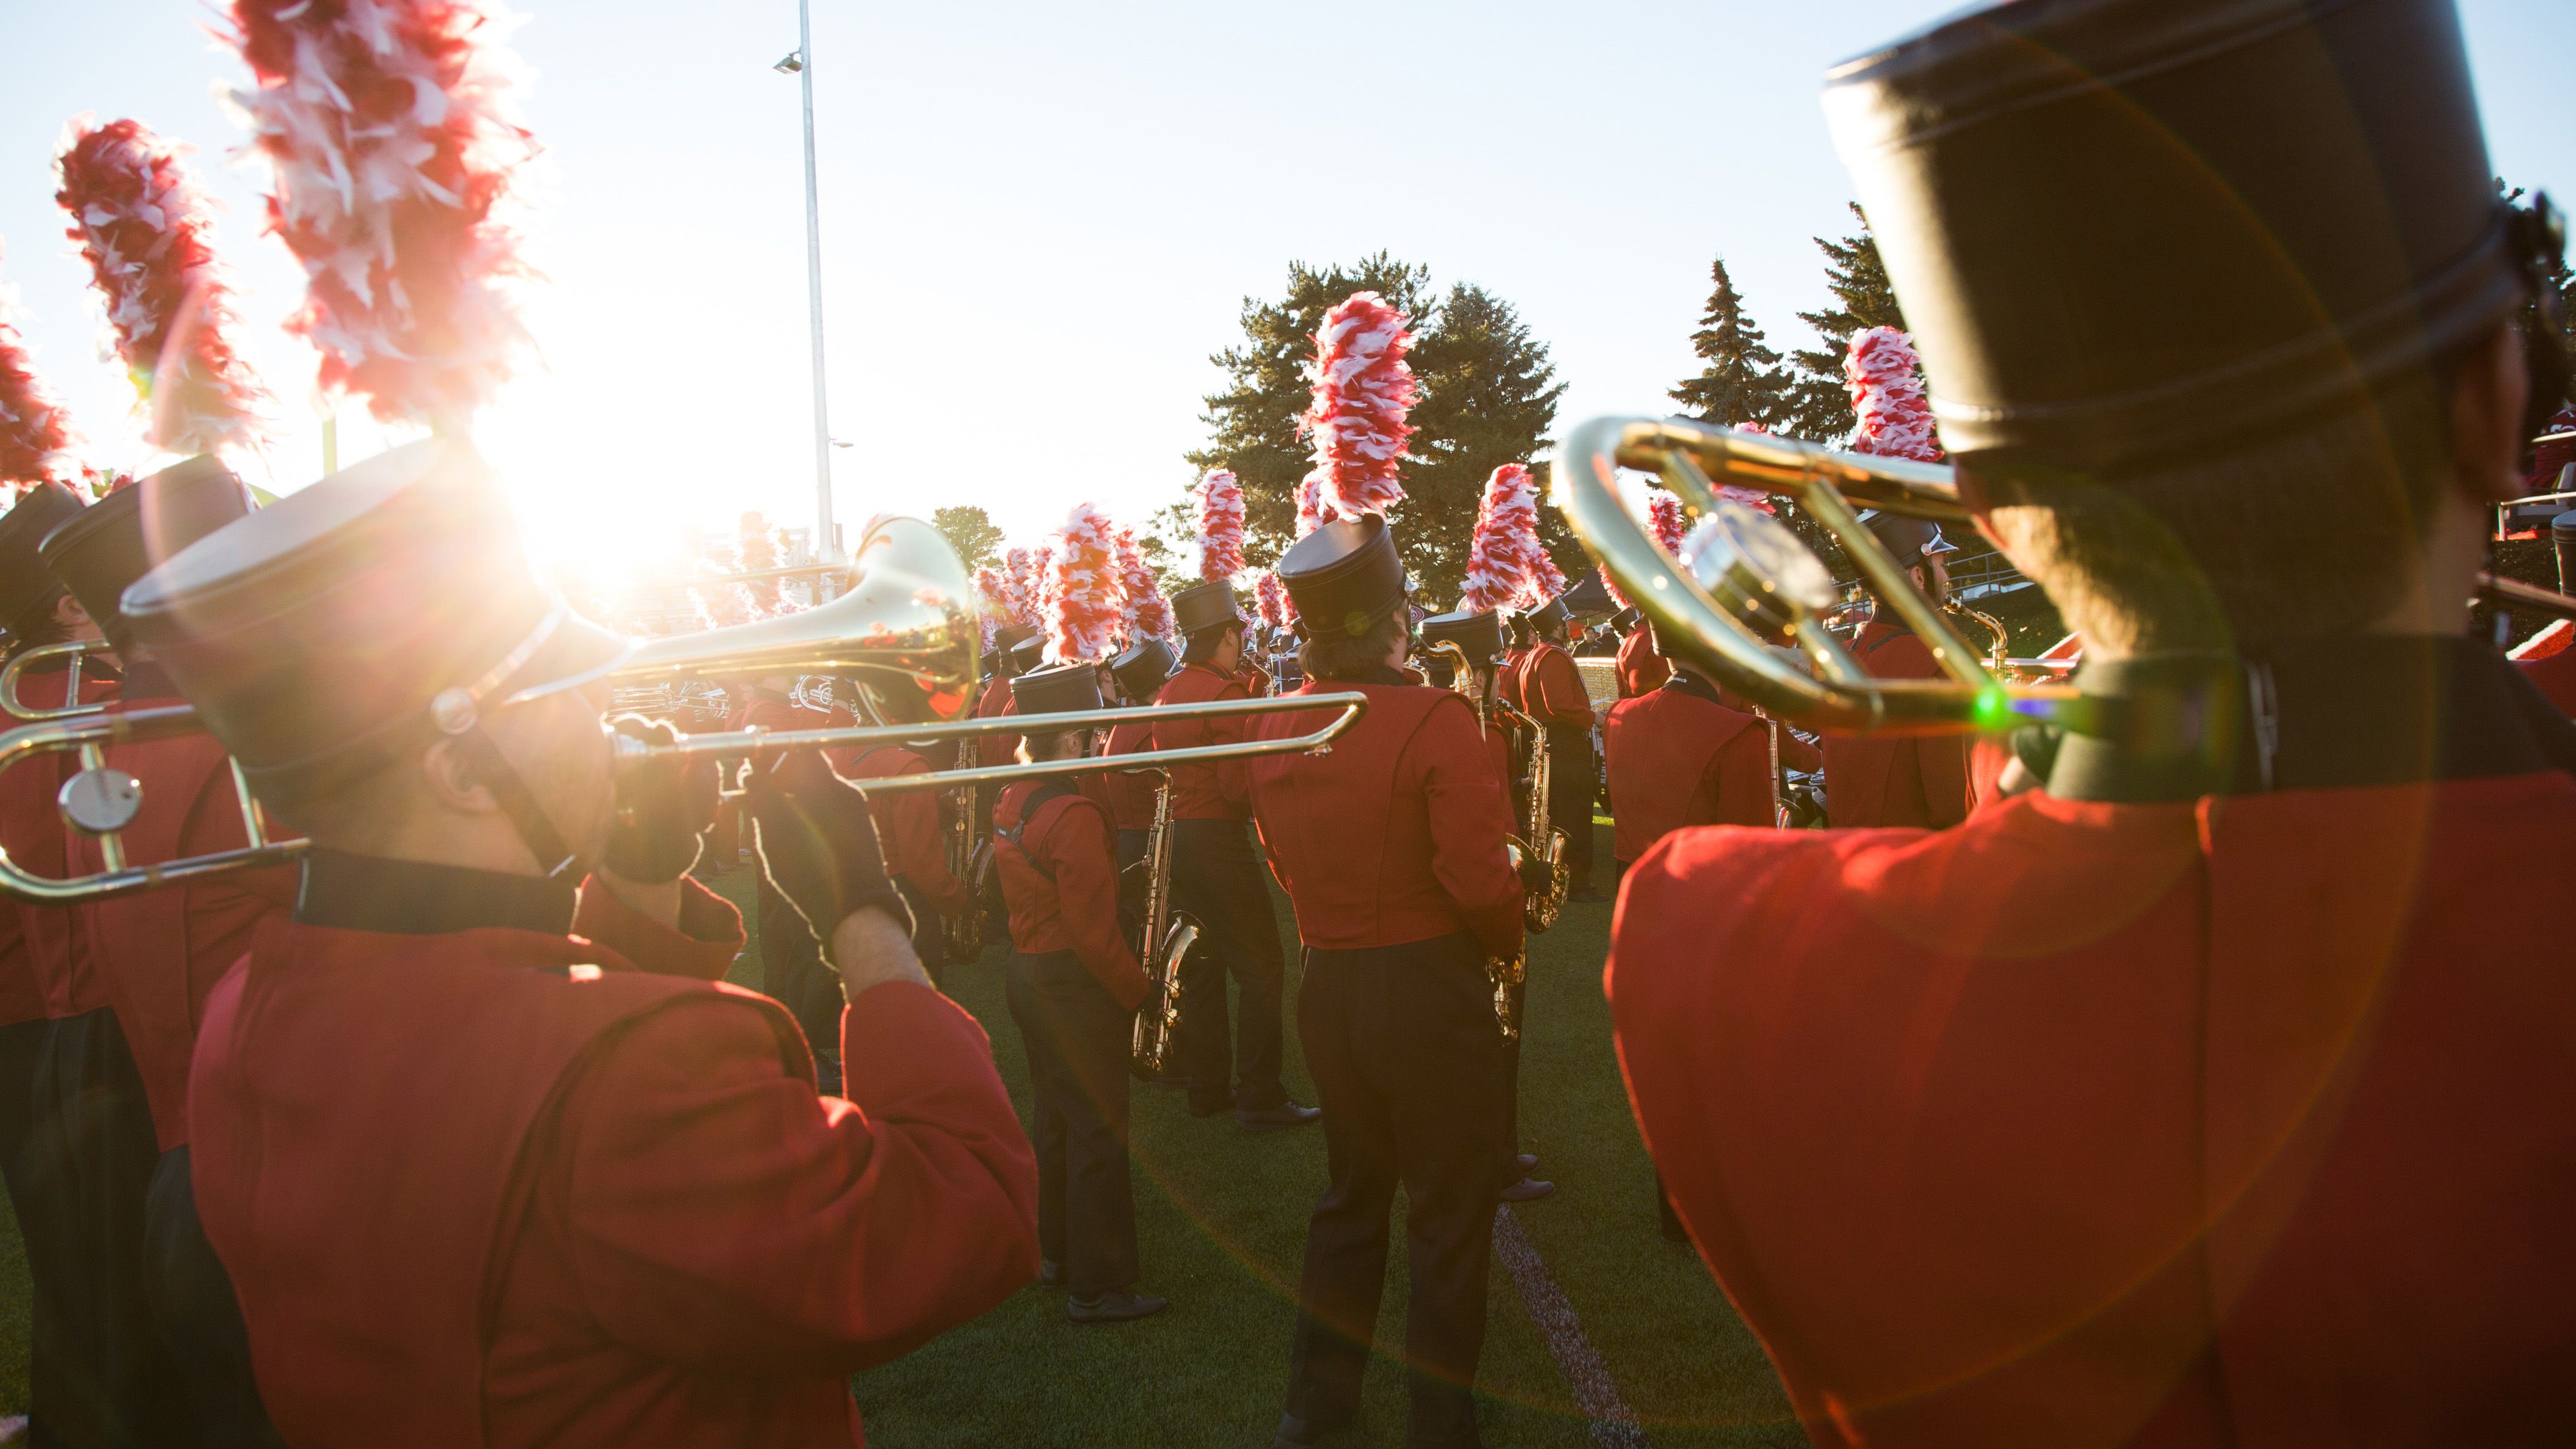 Central Washington University marching band puts on a show during a home football game at Tomlinson Stadium